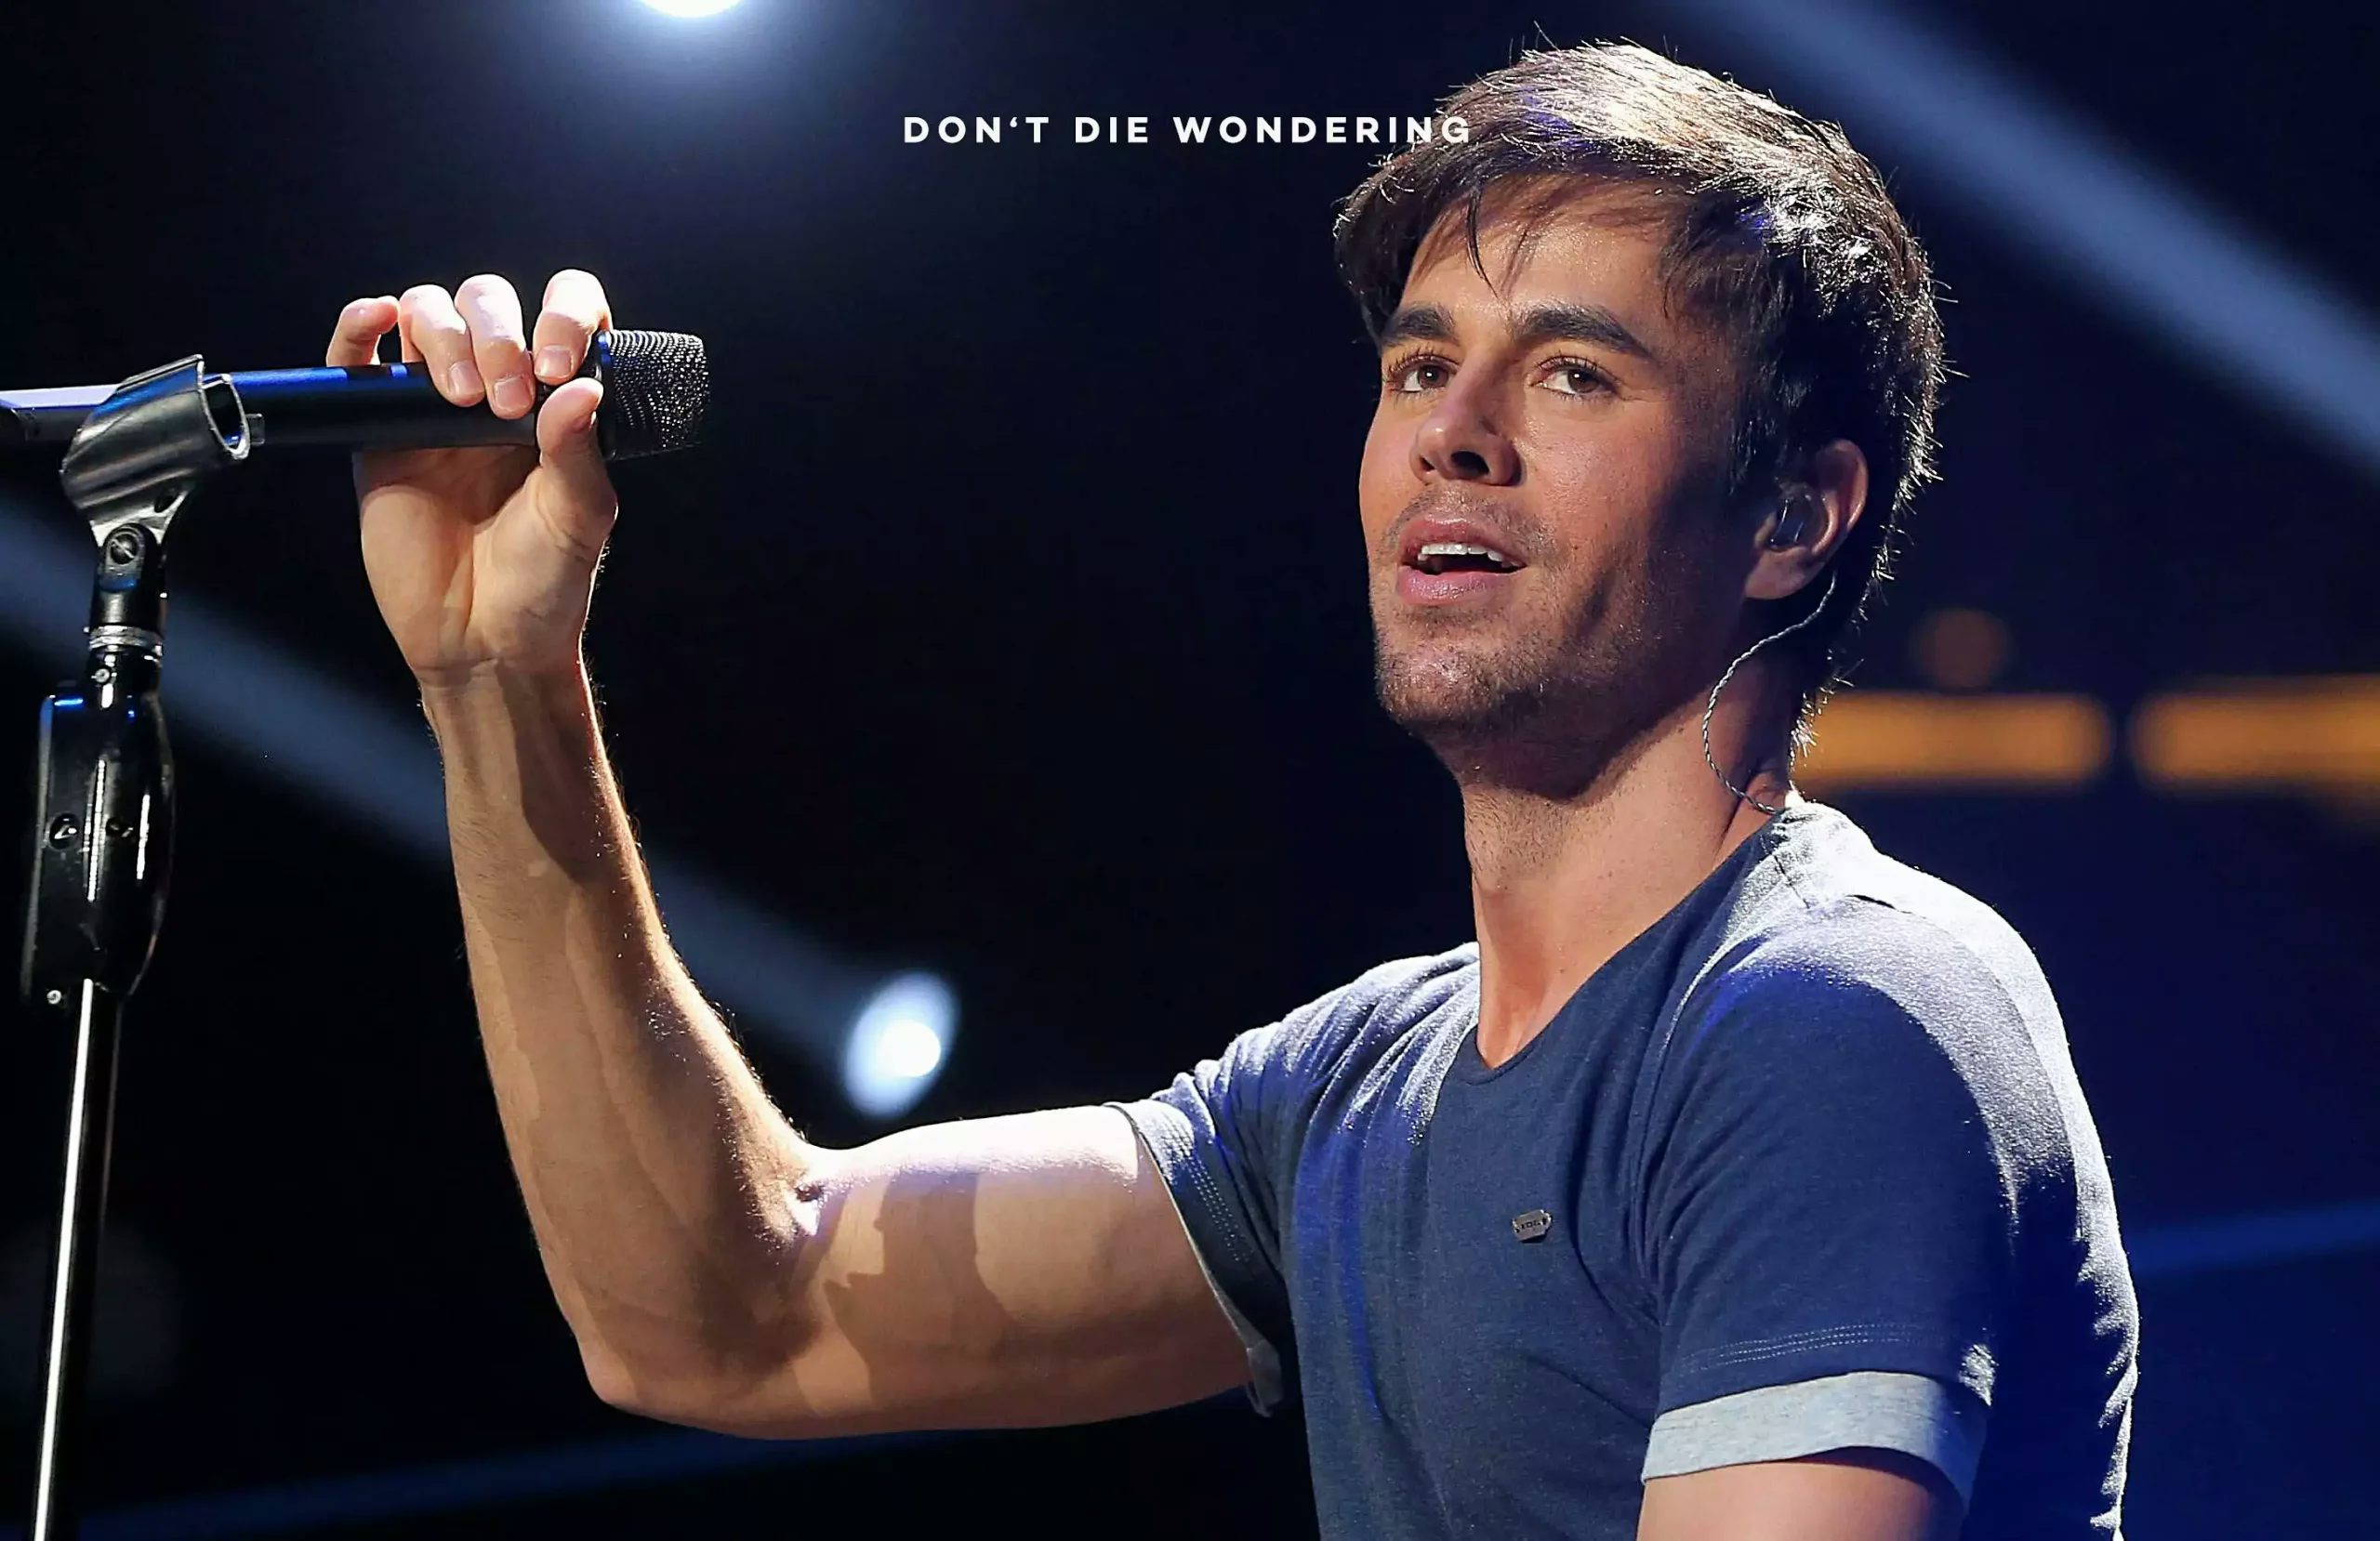 Enrique Iglesias – “Be who you are, not whom the world wants you to be”